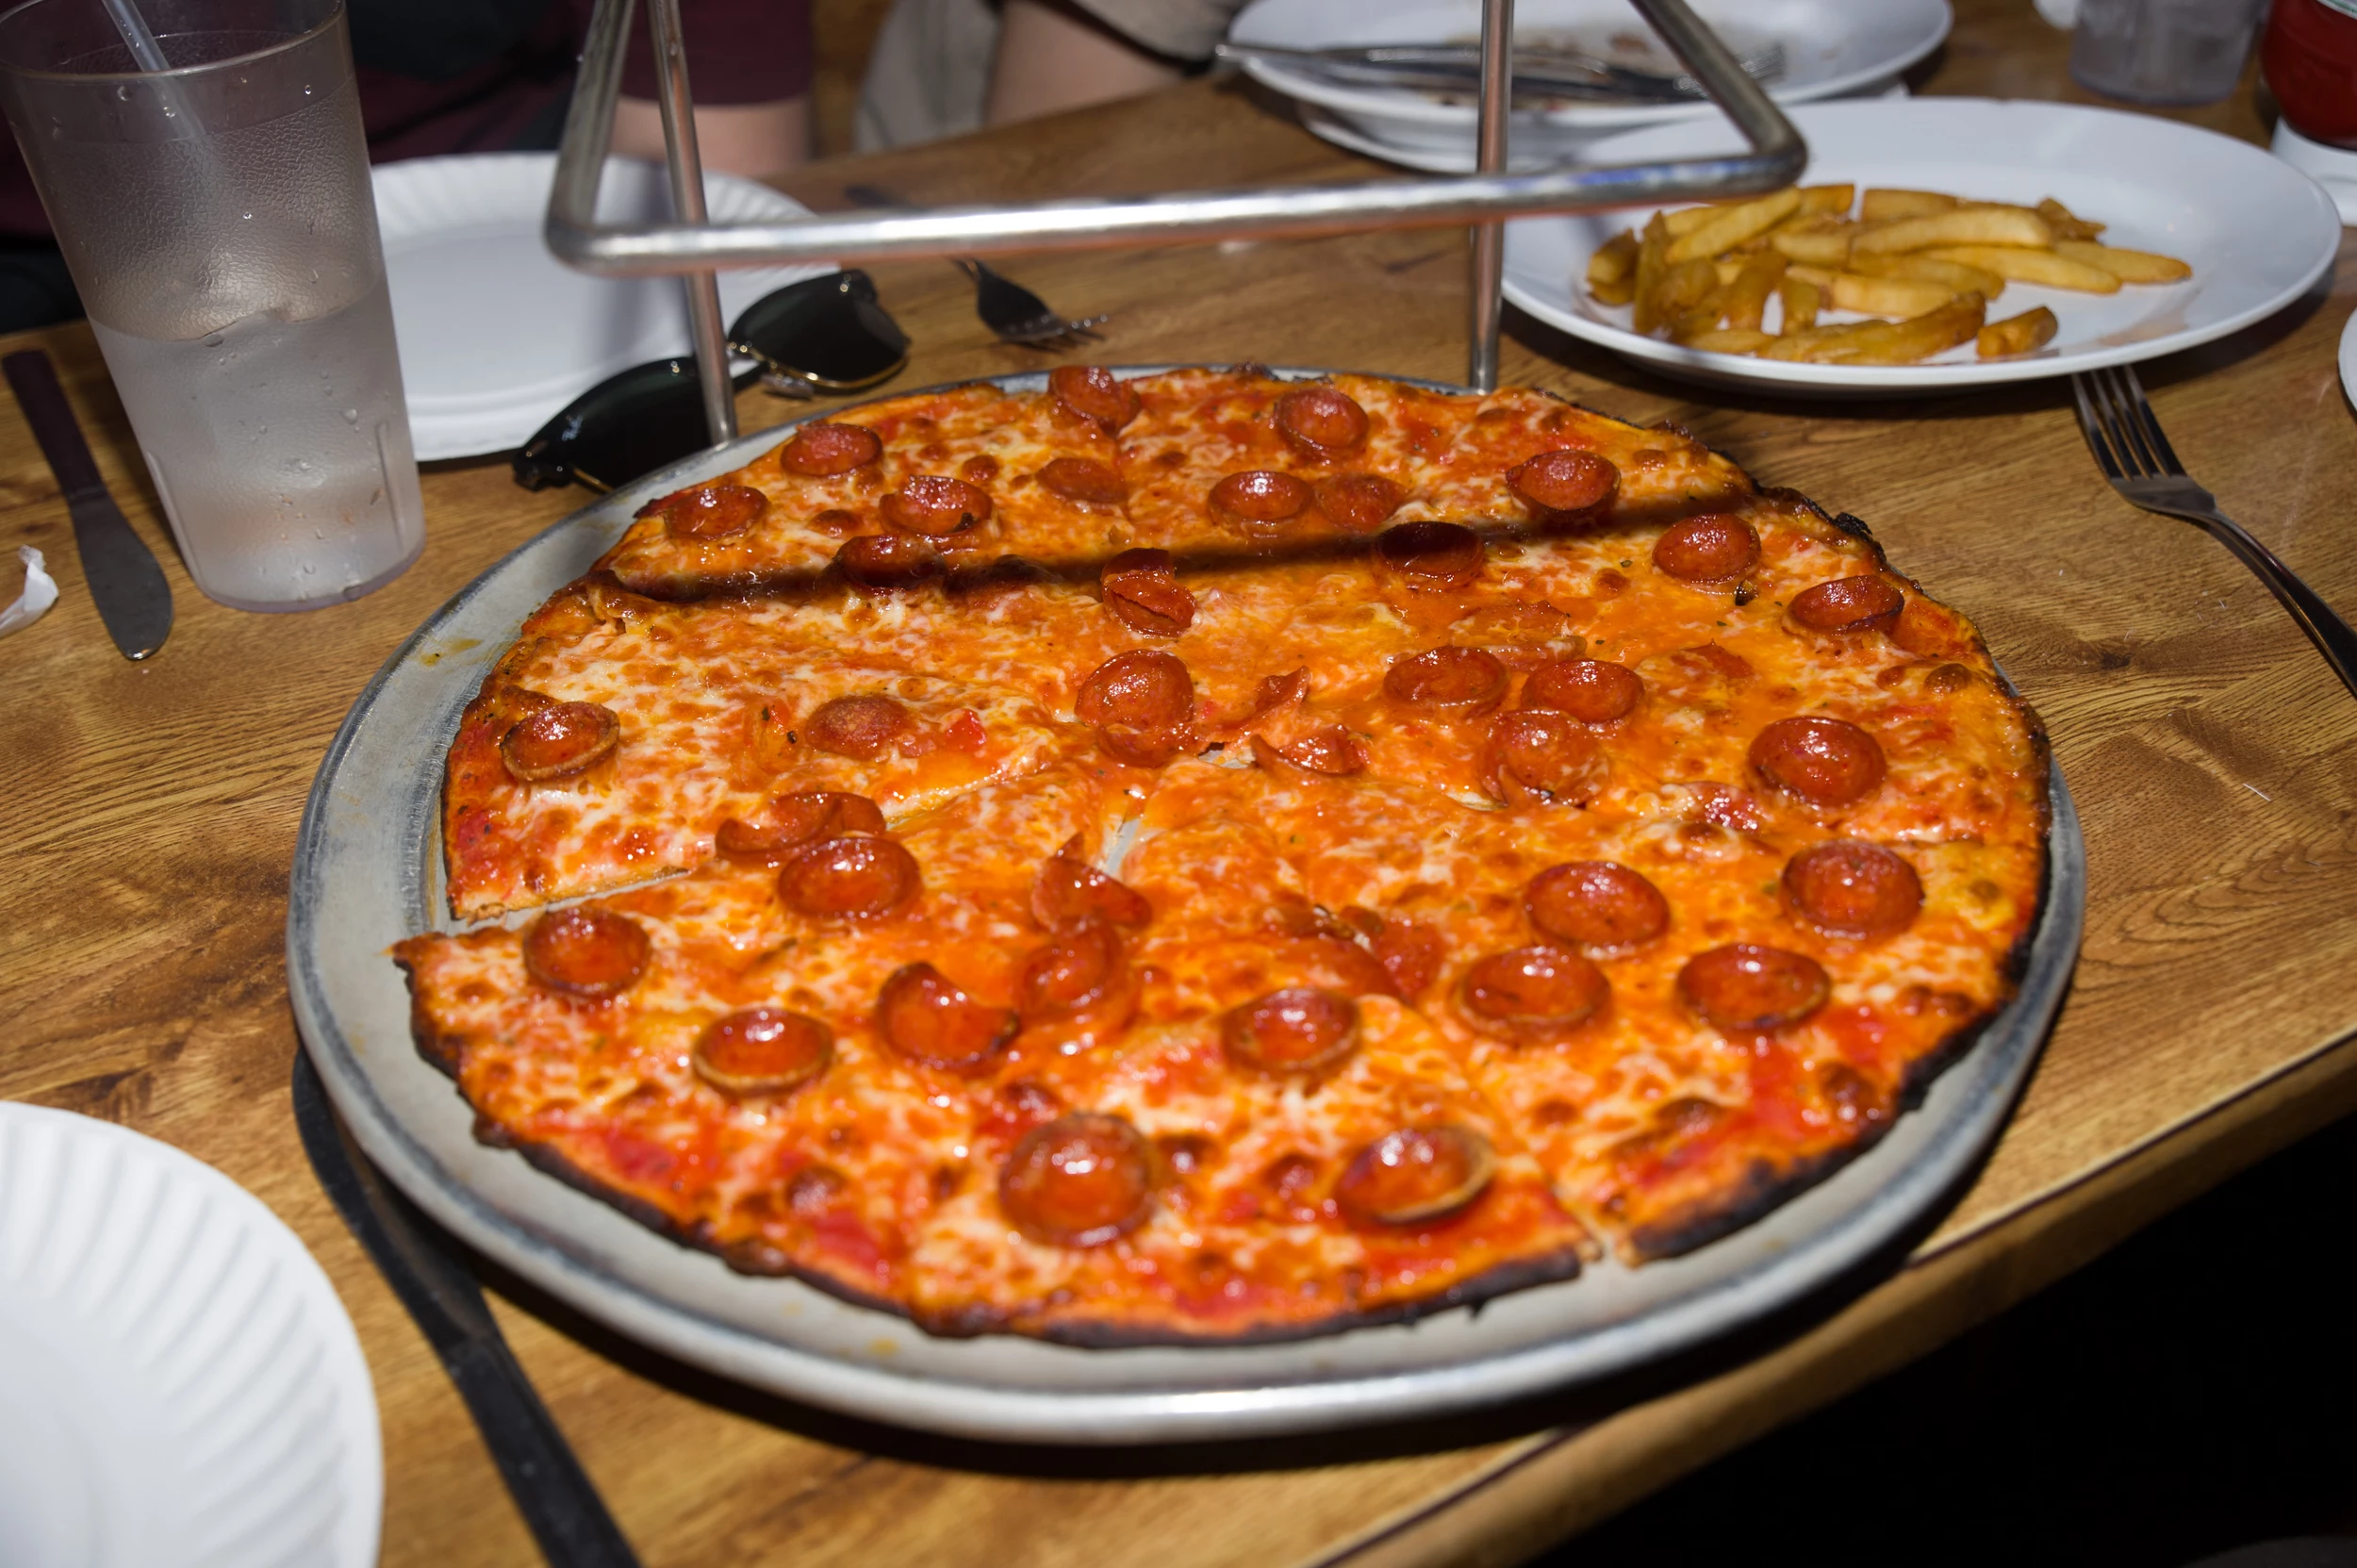 It's true, New Jersey is the 'pizza capital of the world'